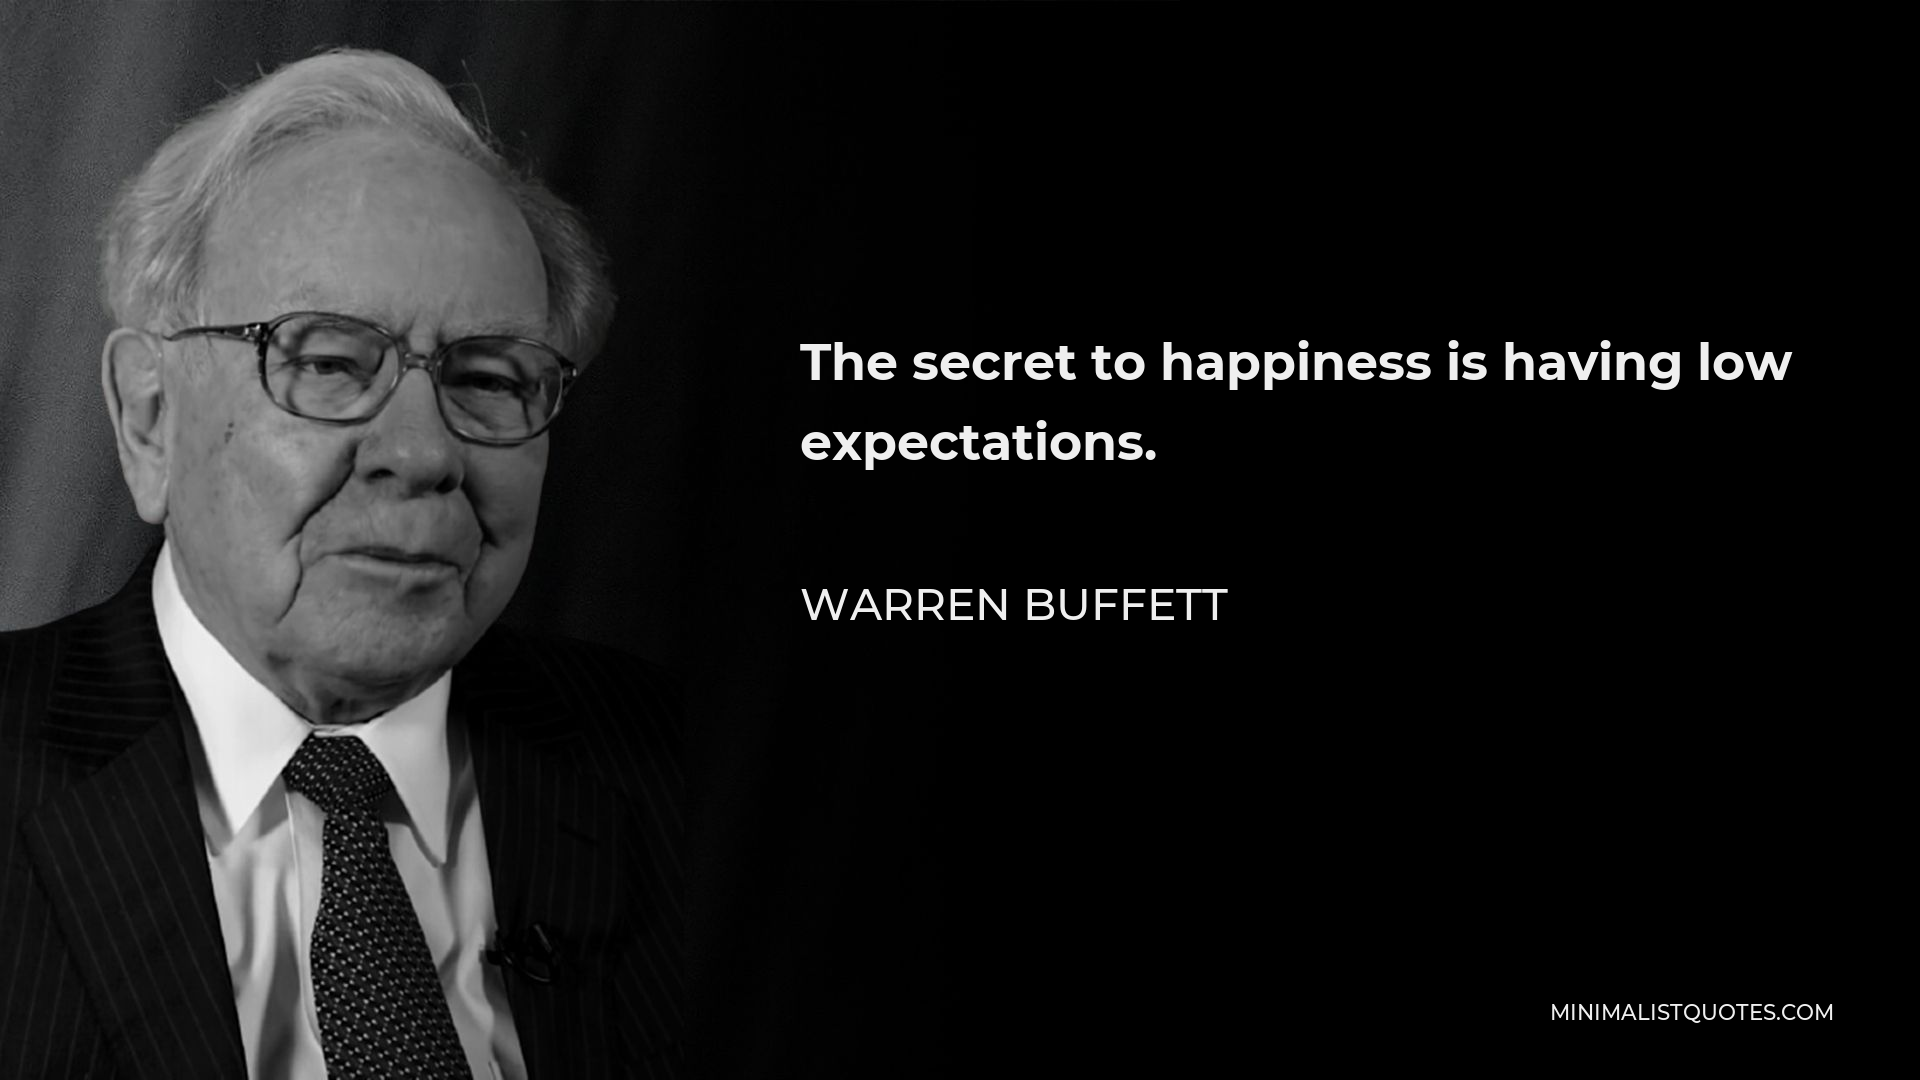 Warren Buffett Quote - The secret to happiness is having low expectations.